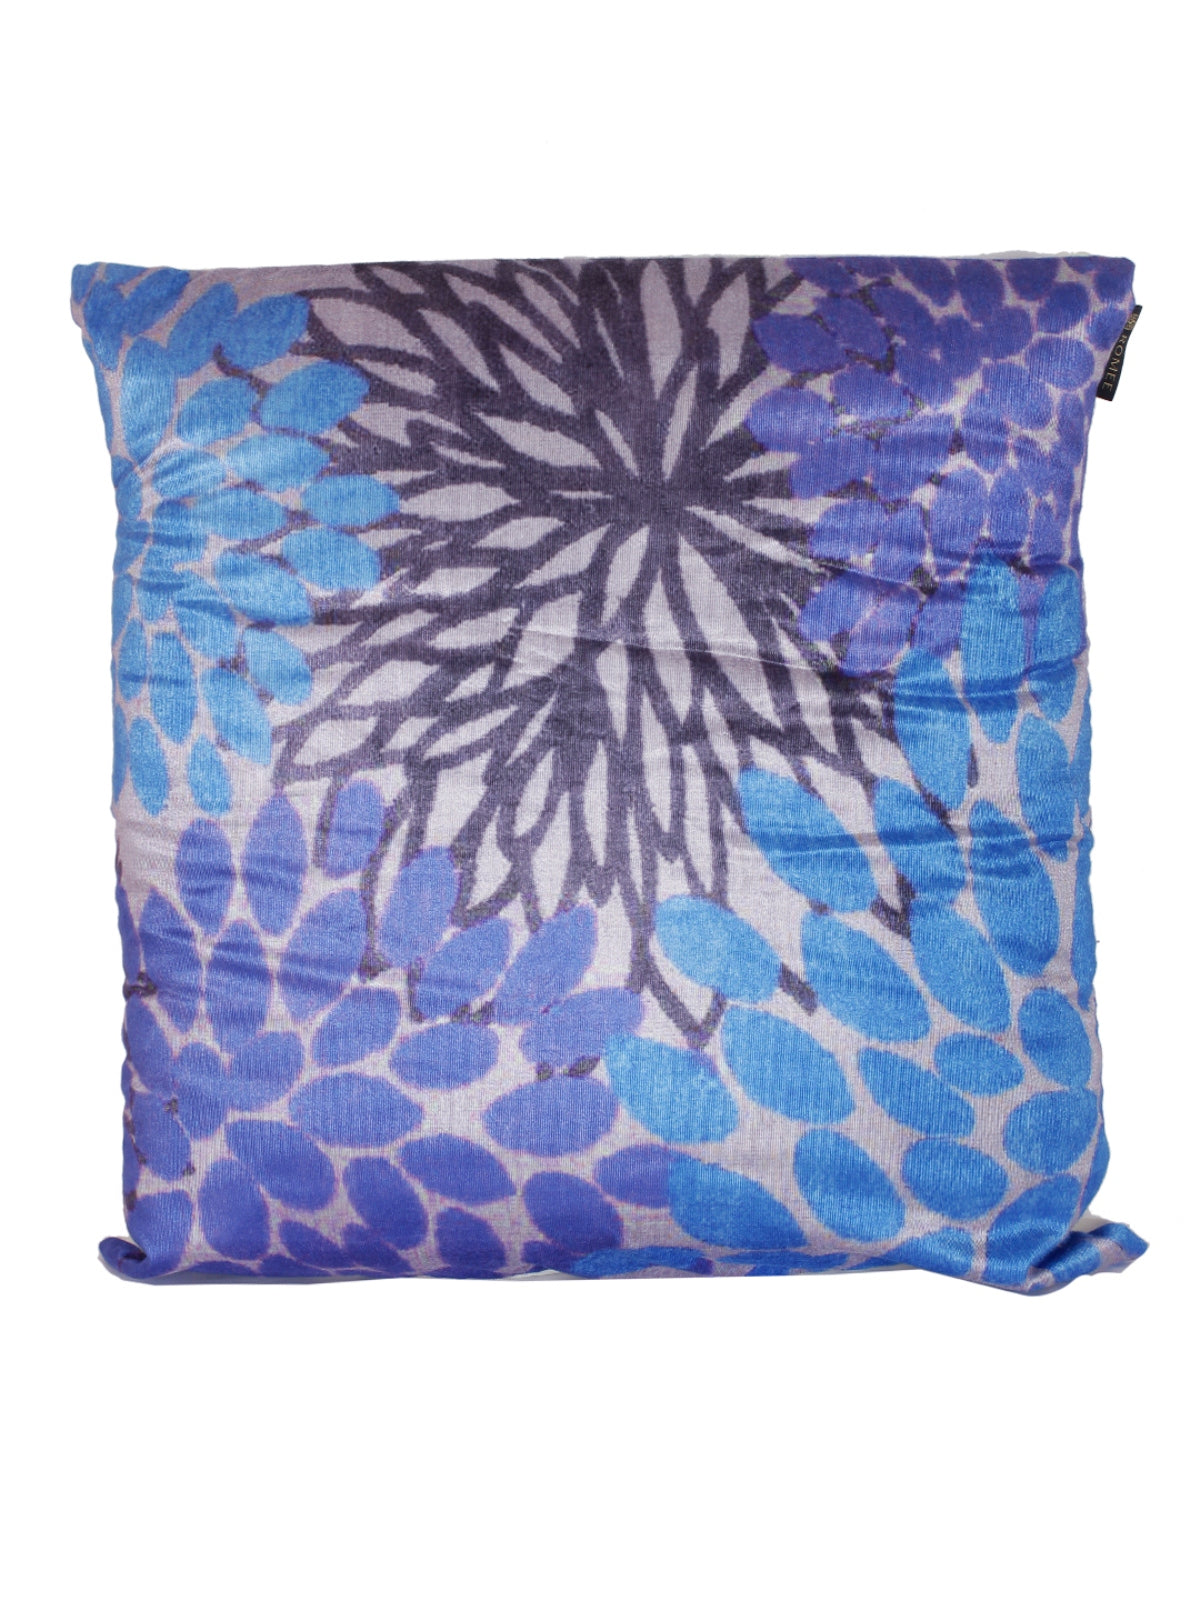 Blue and White Set of 2 Cushion Covers 24x24 Inch